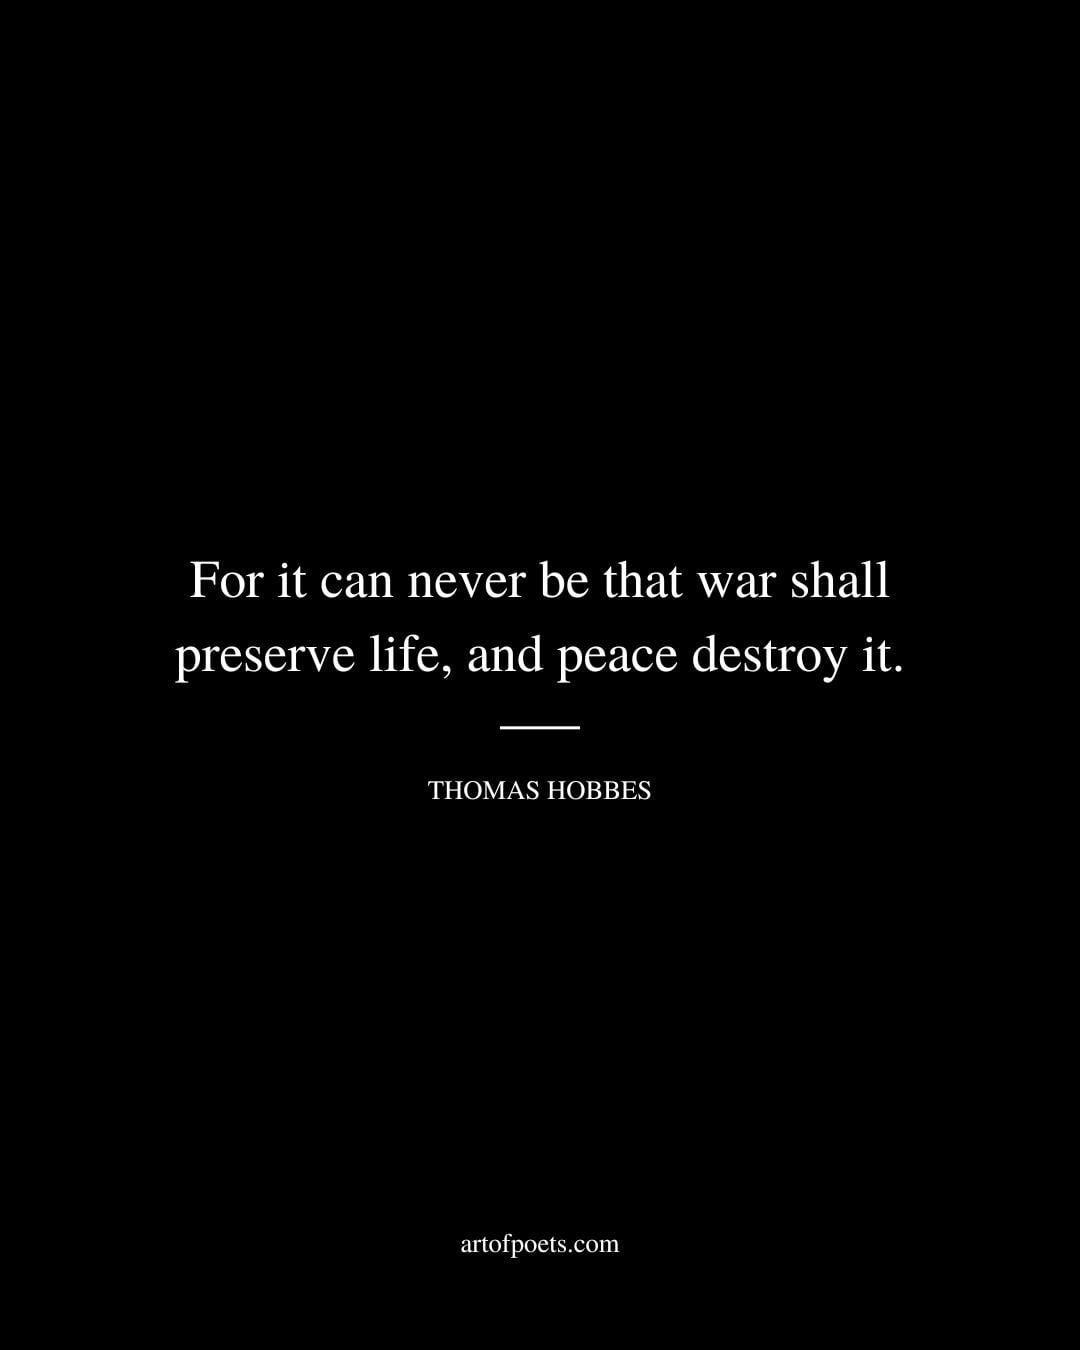 For it can never be that war shall preserve life and peace destroy it